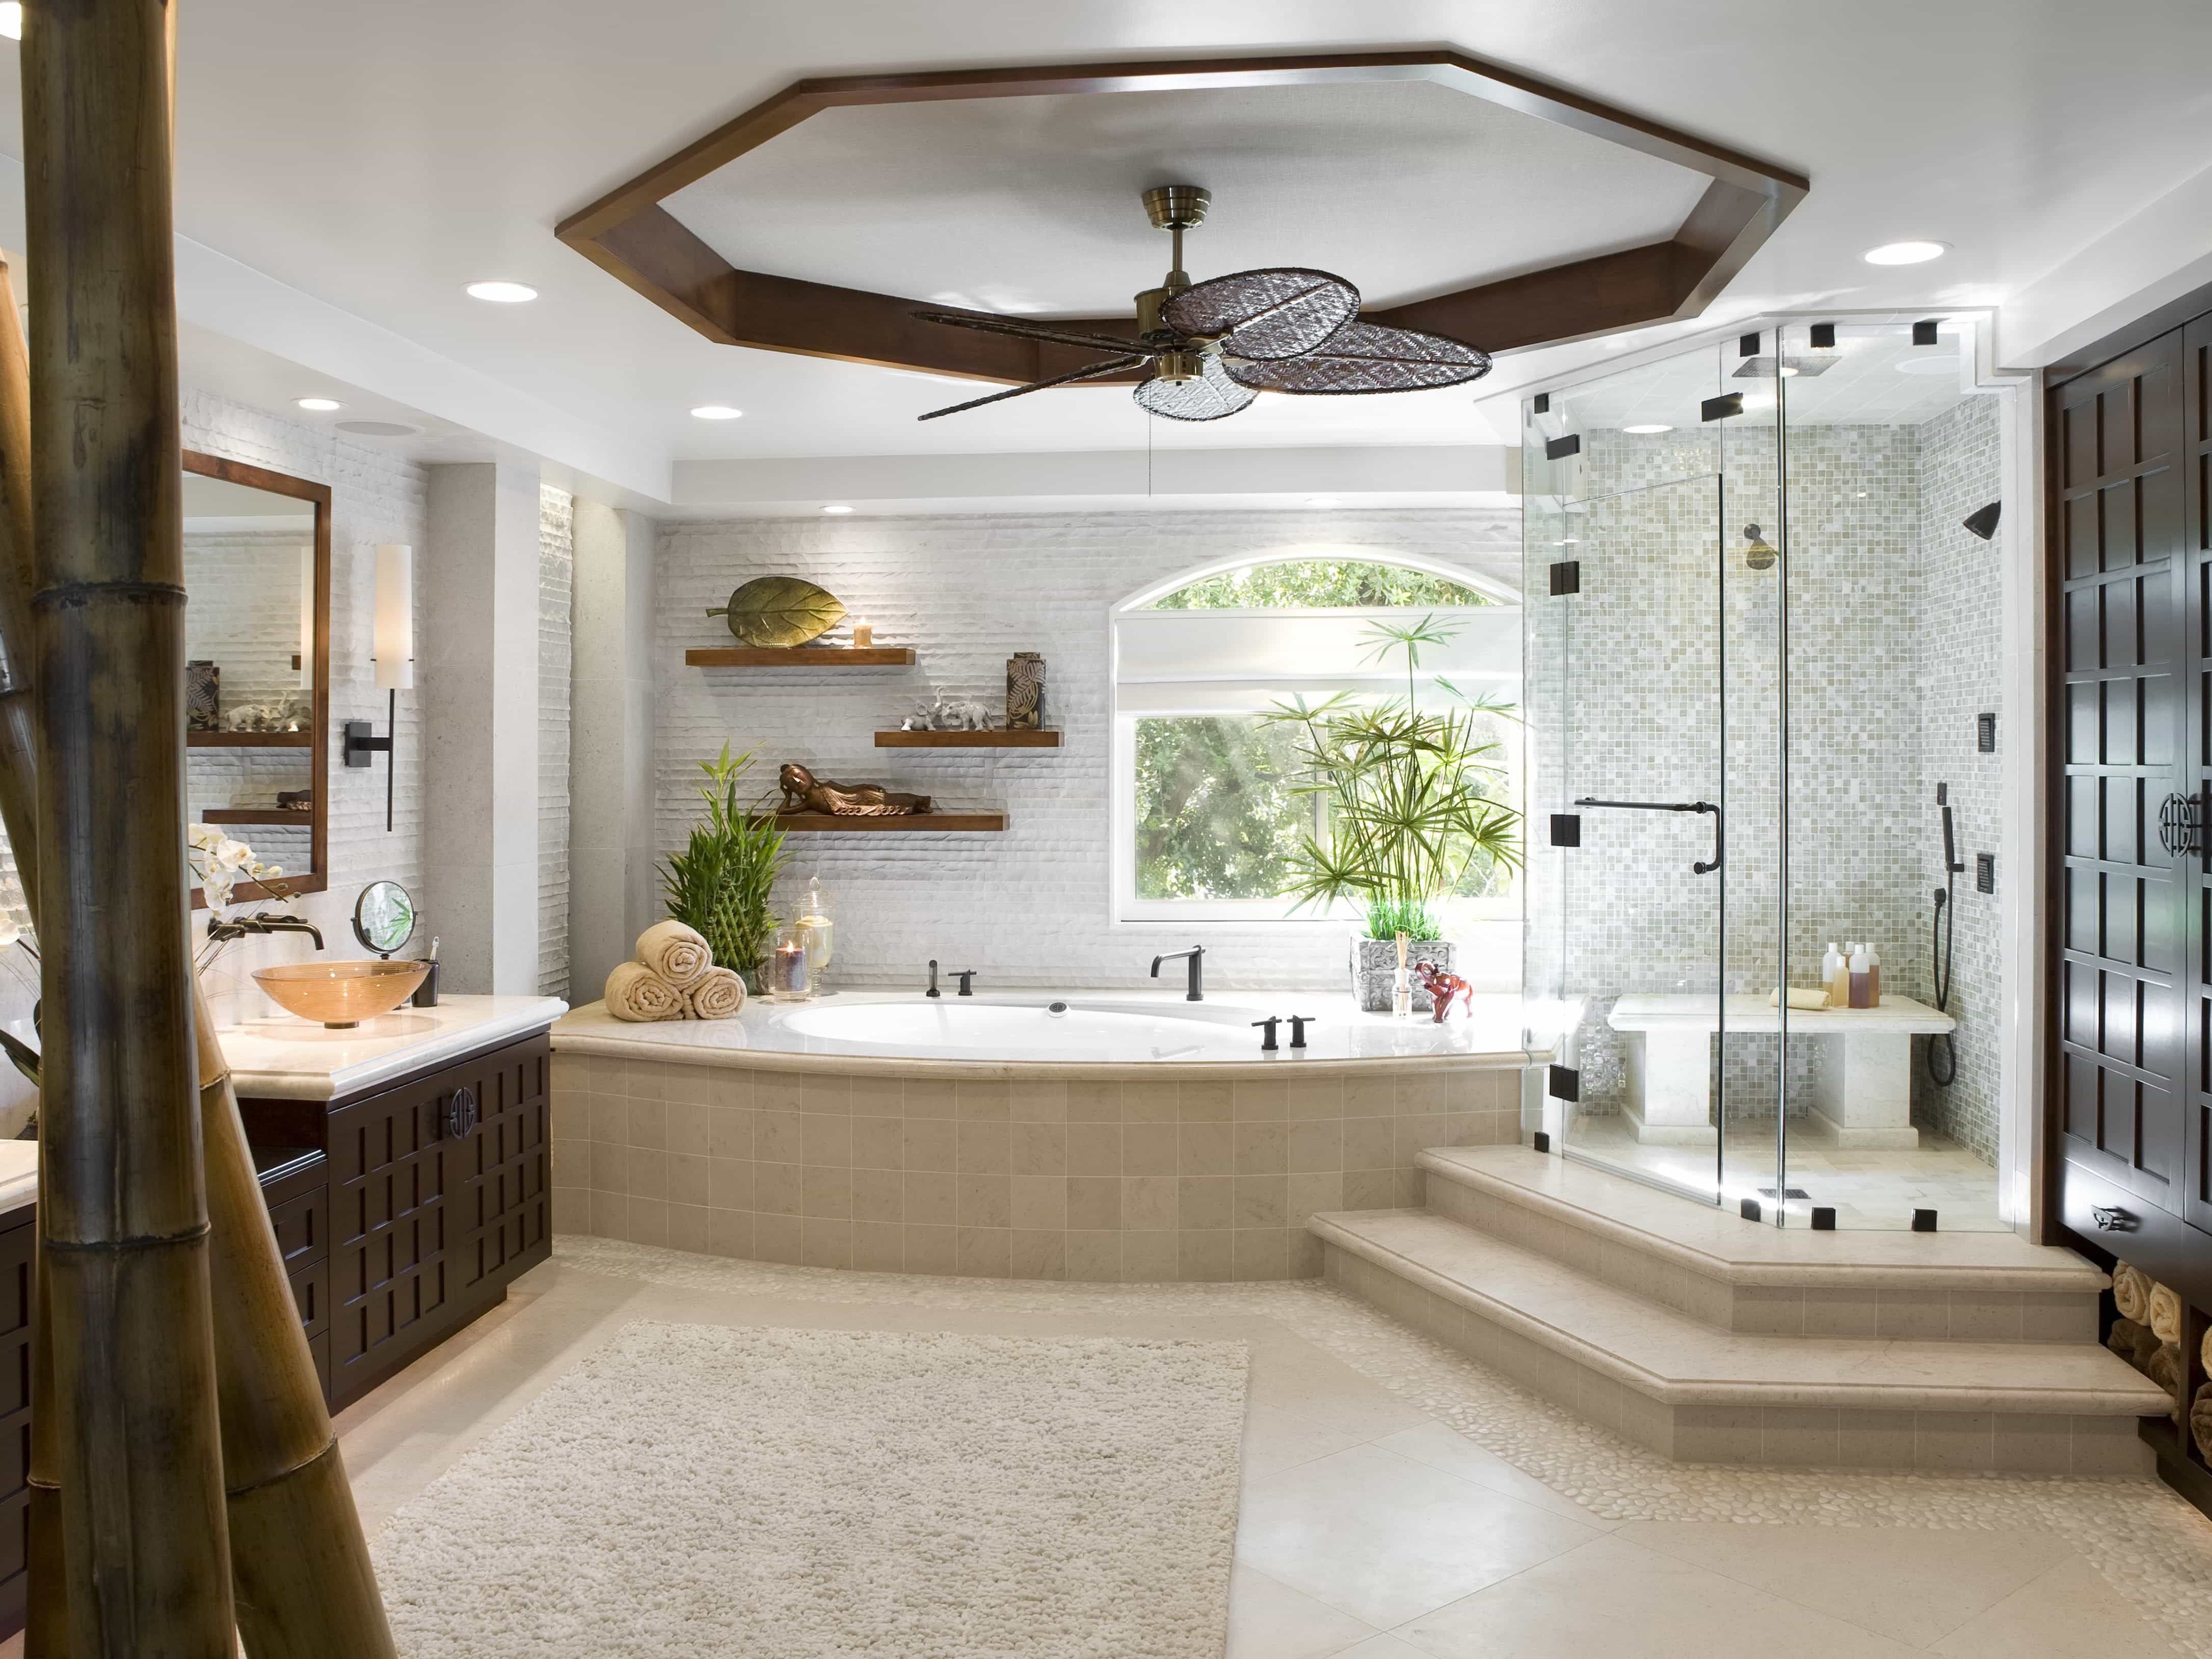 Neutral Transitional Shower And Spa Bathroom Combination (View 13 of 16)